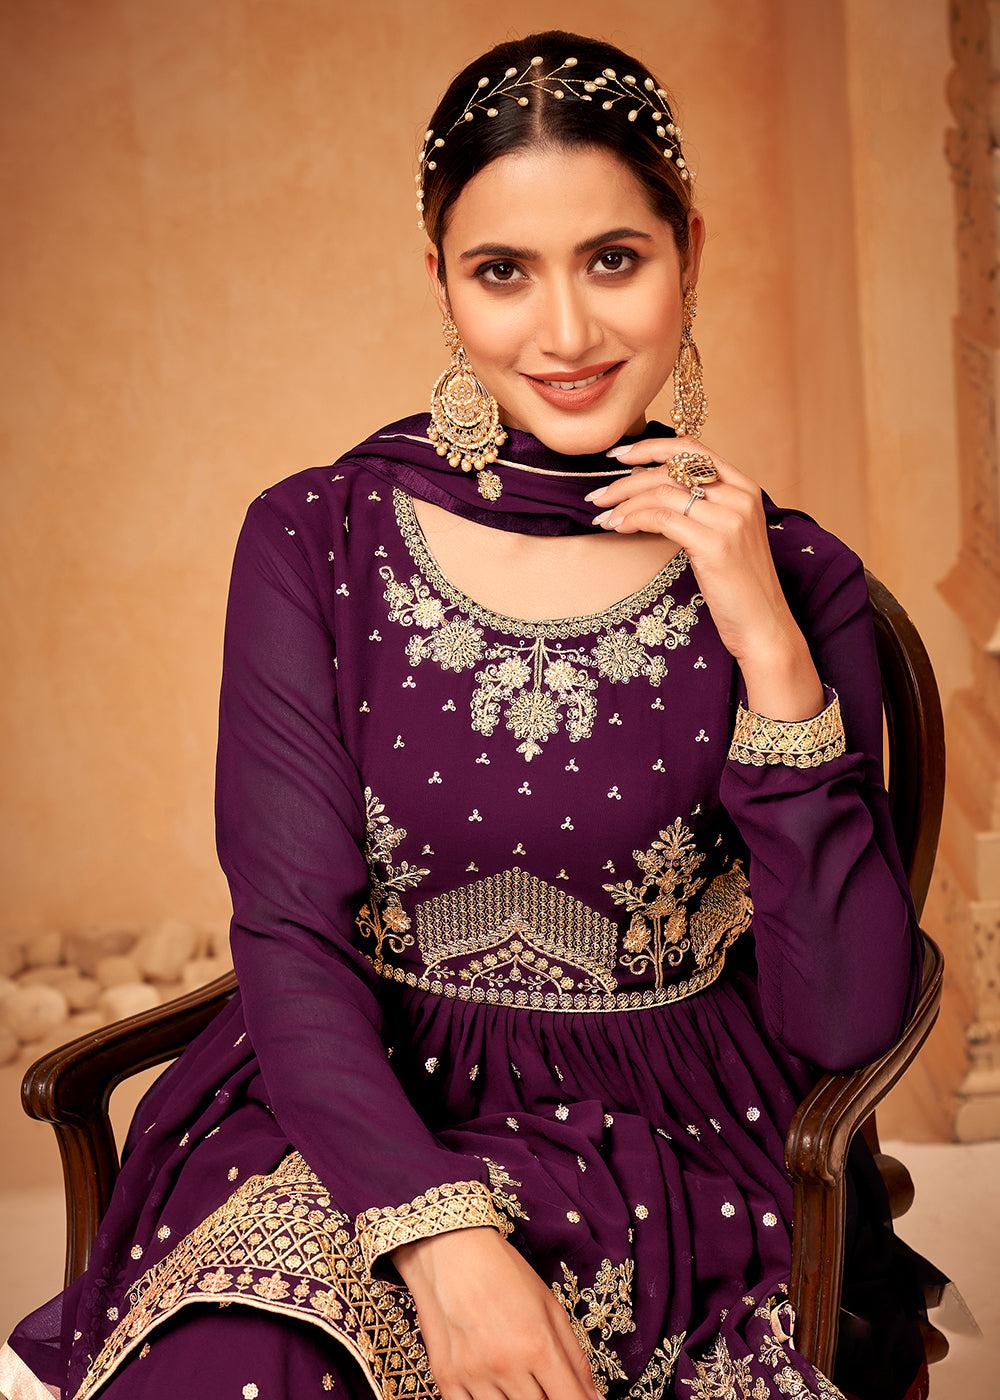 Shop Now Awesome Purple Embroidered Wedding Festive Gharara Suit Online at Empress Clothing in USA, UK, Canada, Germany & Worldwide. 